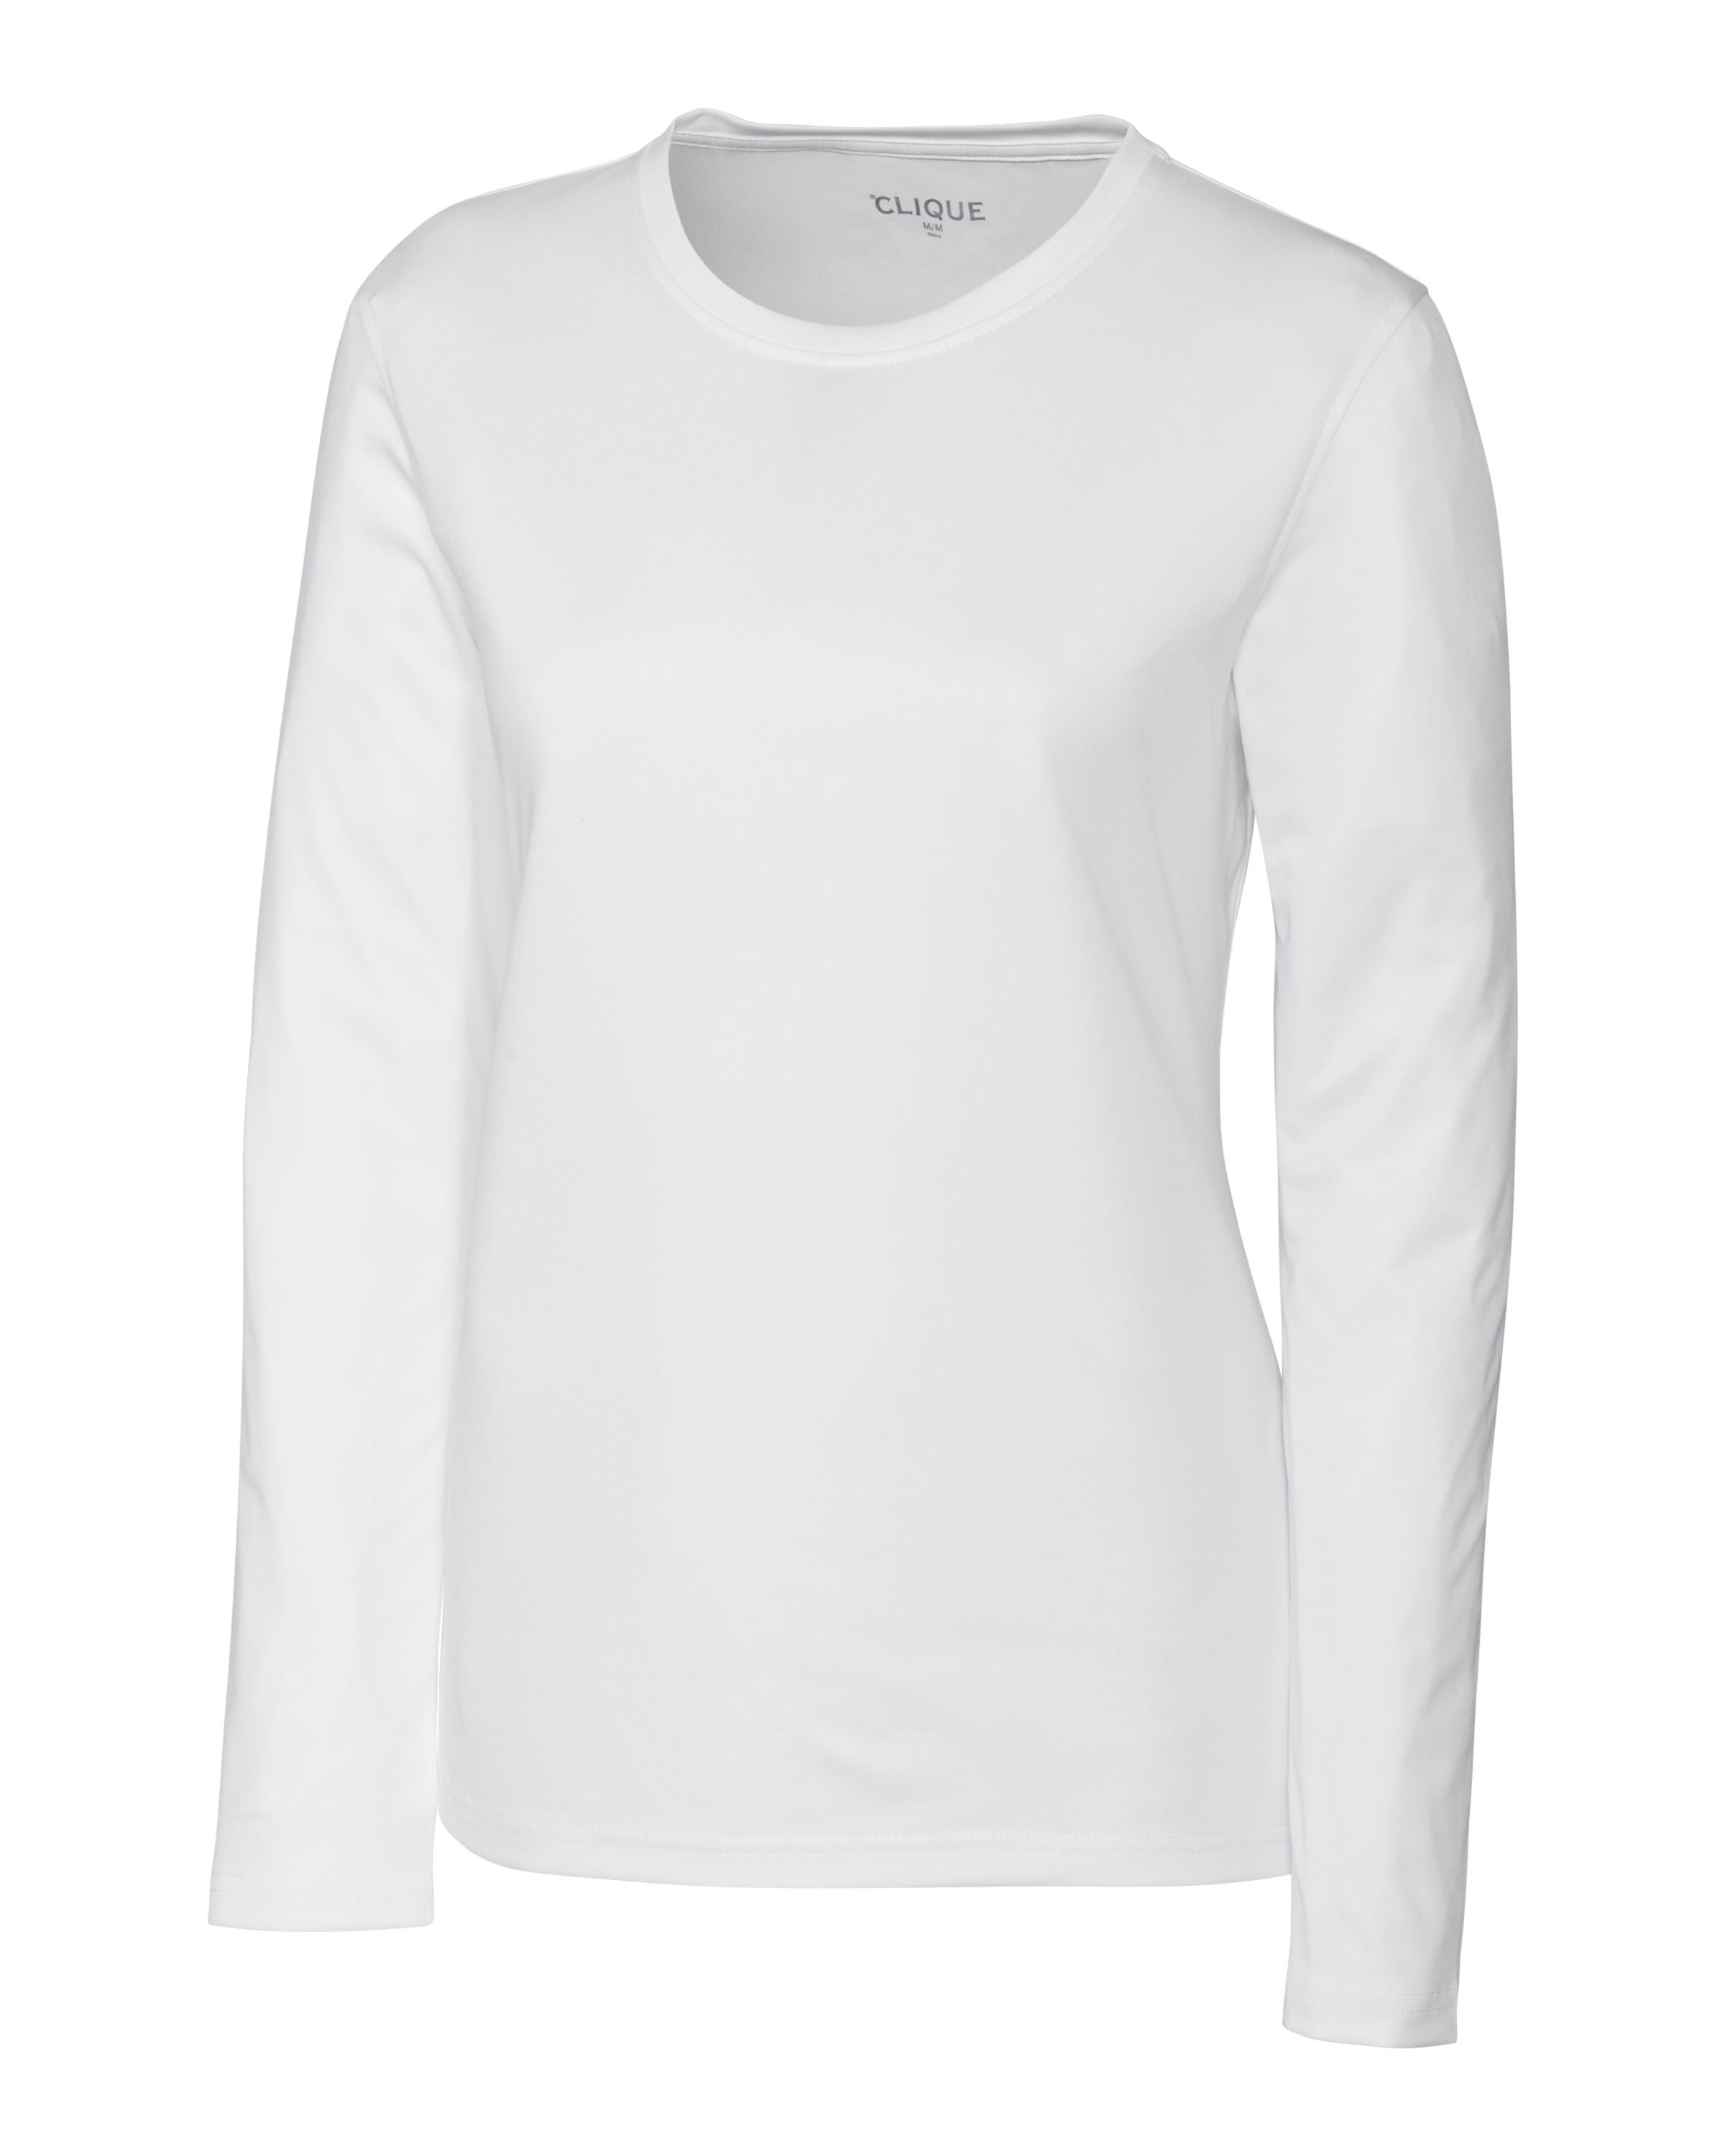 Clique L/S Spin Jersey Tee Womens